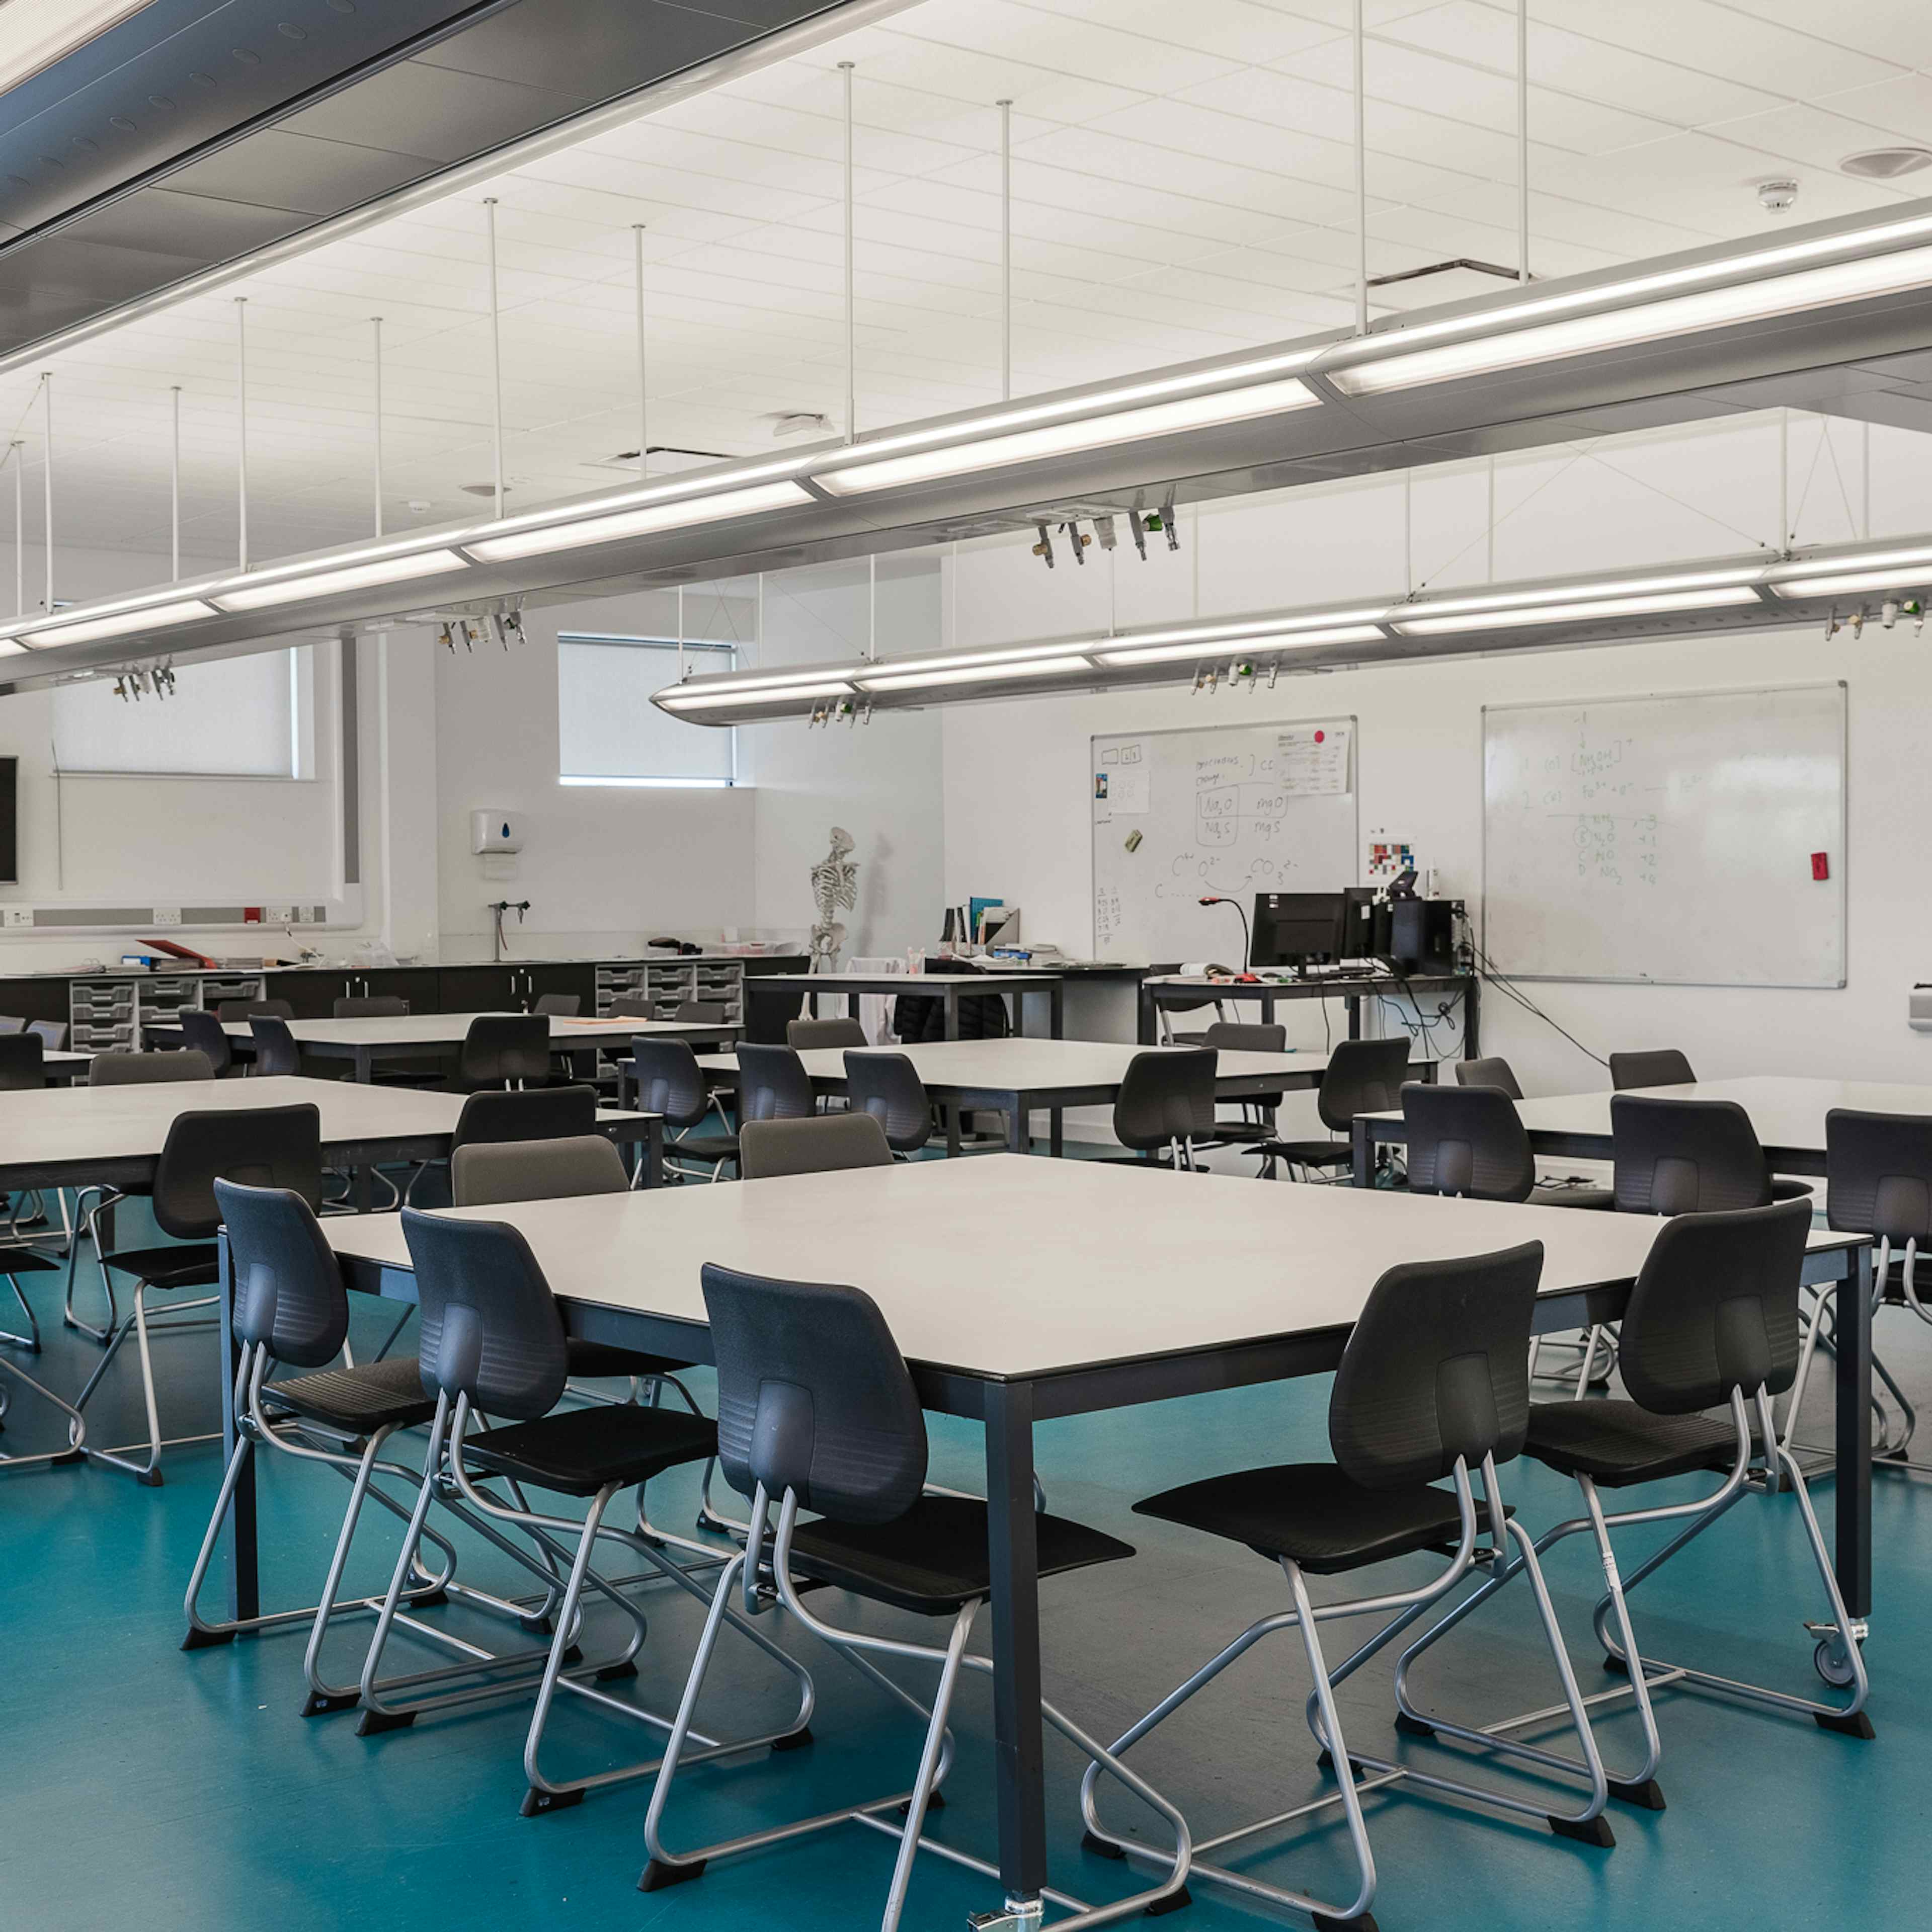 London Academy of Excellence Tottenham - Science classroom / Laboratory image 3